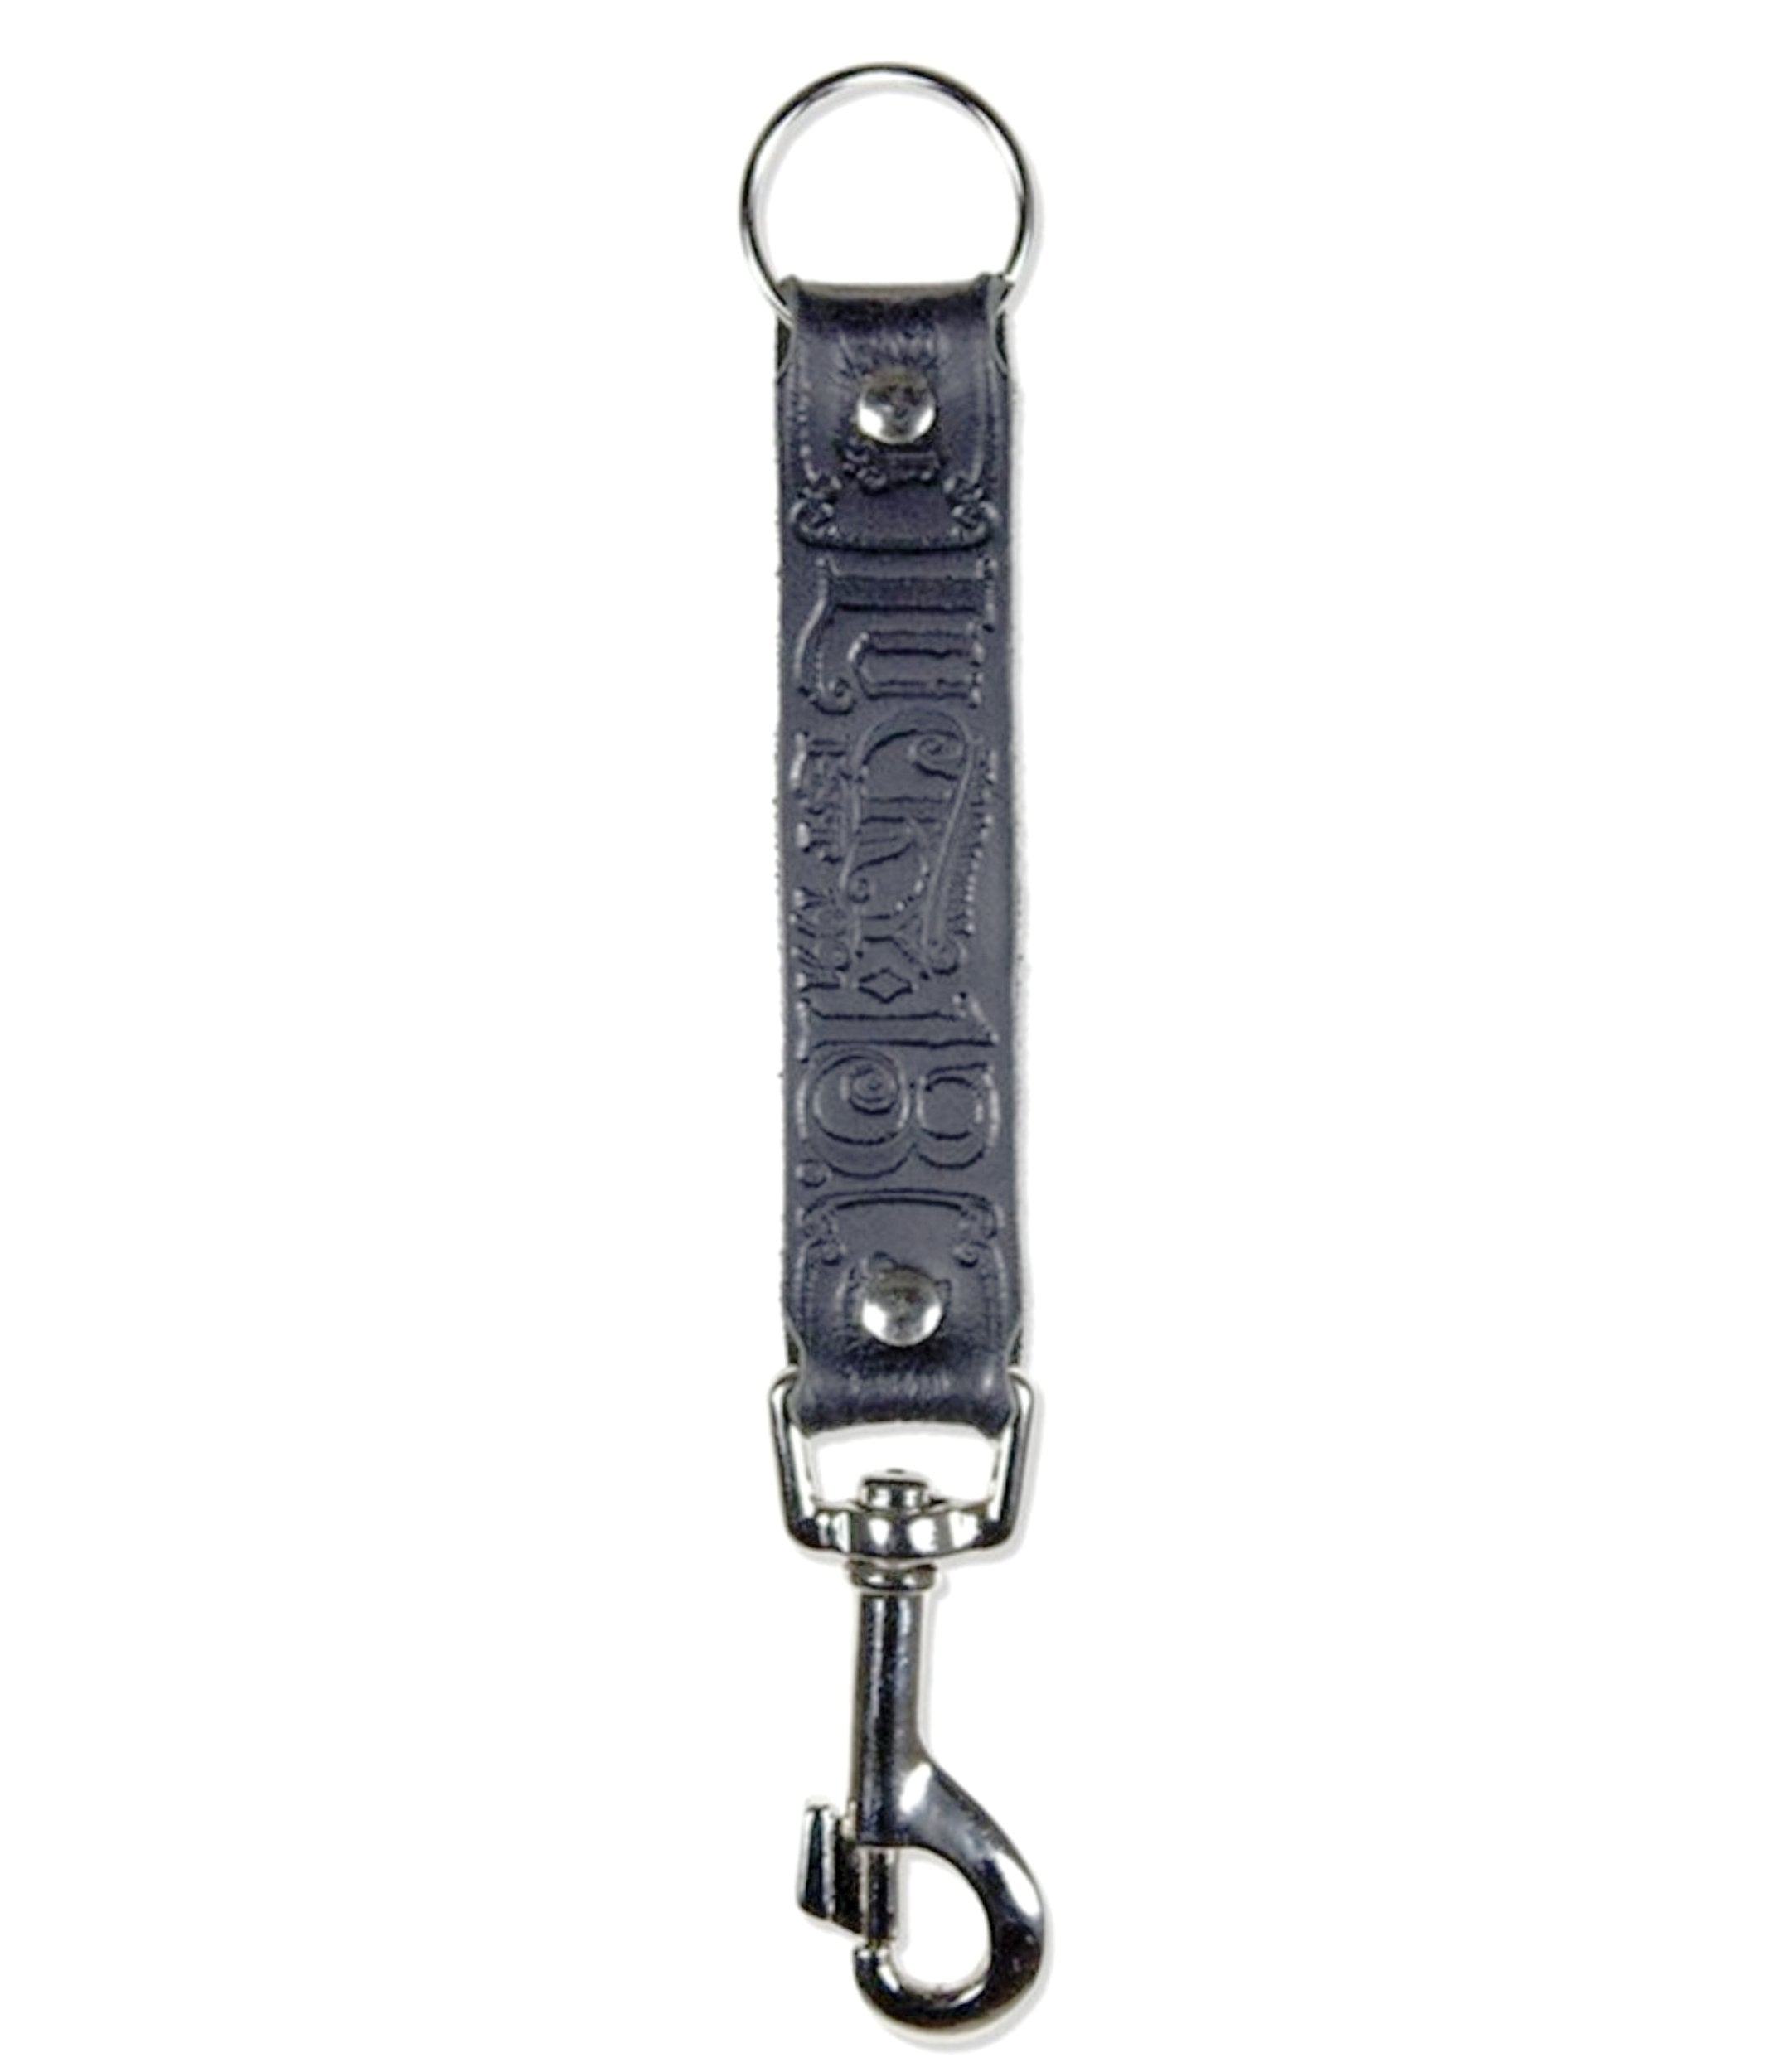 The MFG CO. Embossed Leather Key Fob Clip - BLACK